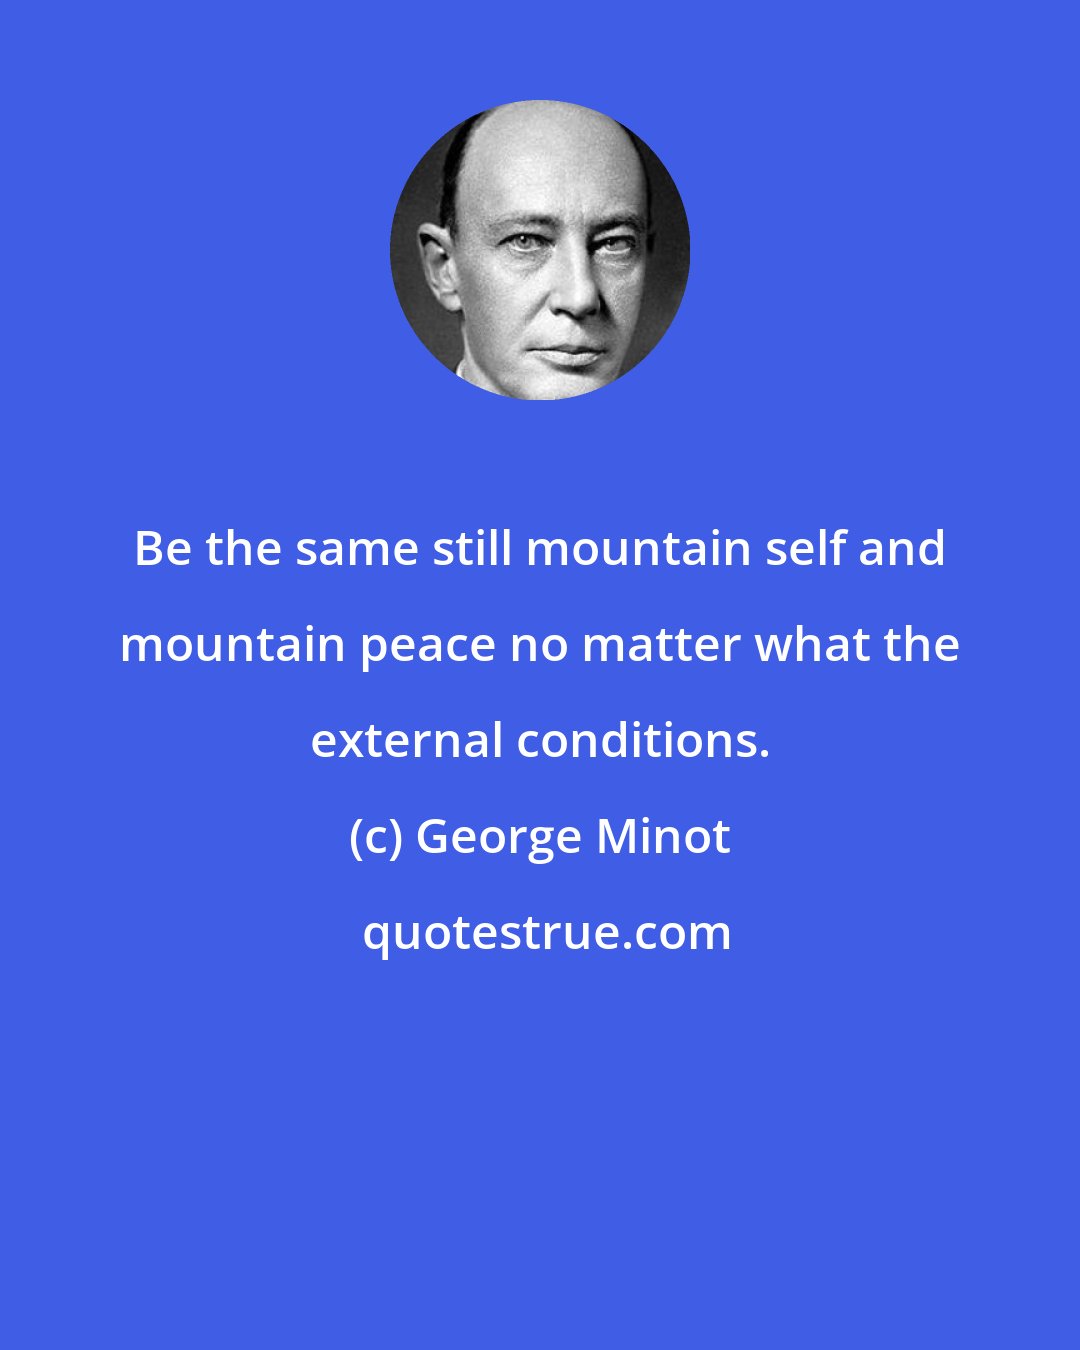 George Minot: Be the same still mountain self and mountain peace no matter what the external conditions.